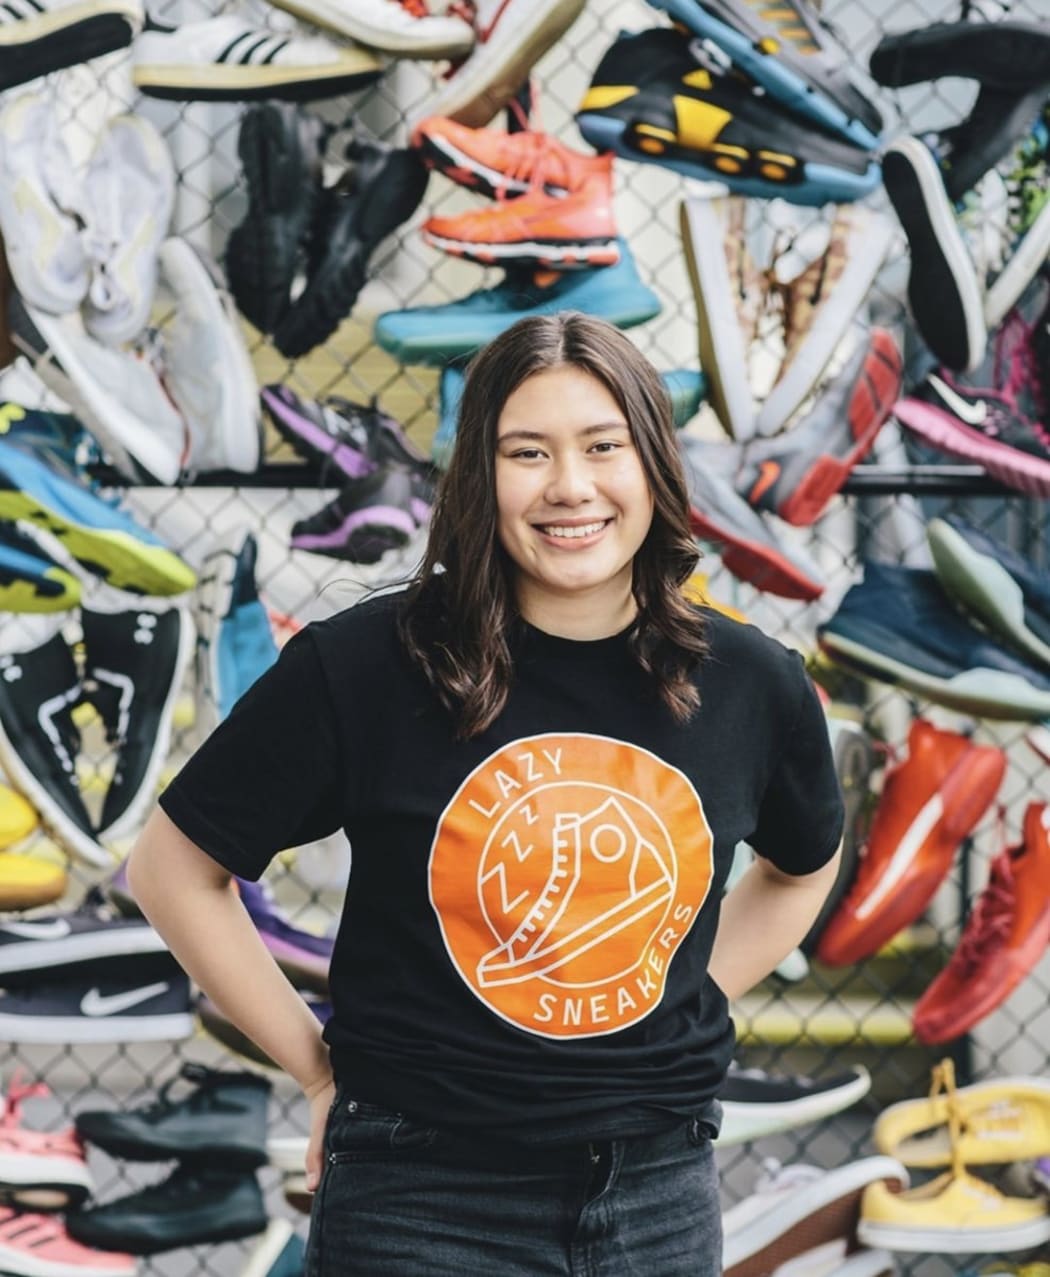 Lazy Sneakers founder Maia Mariner